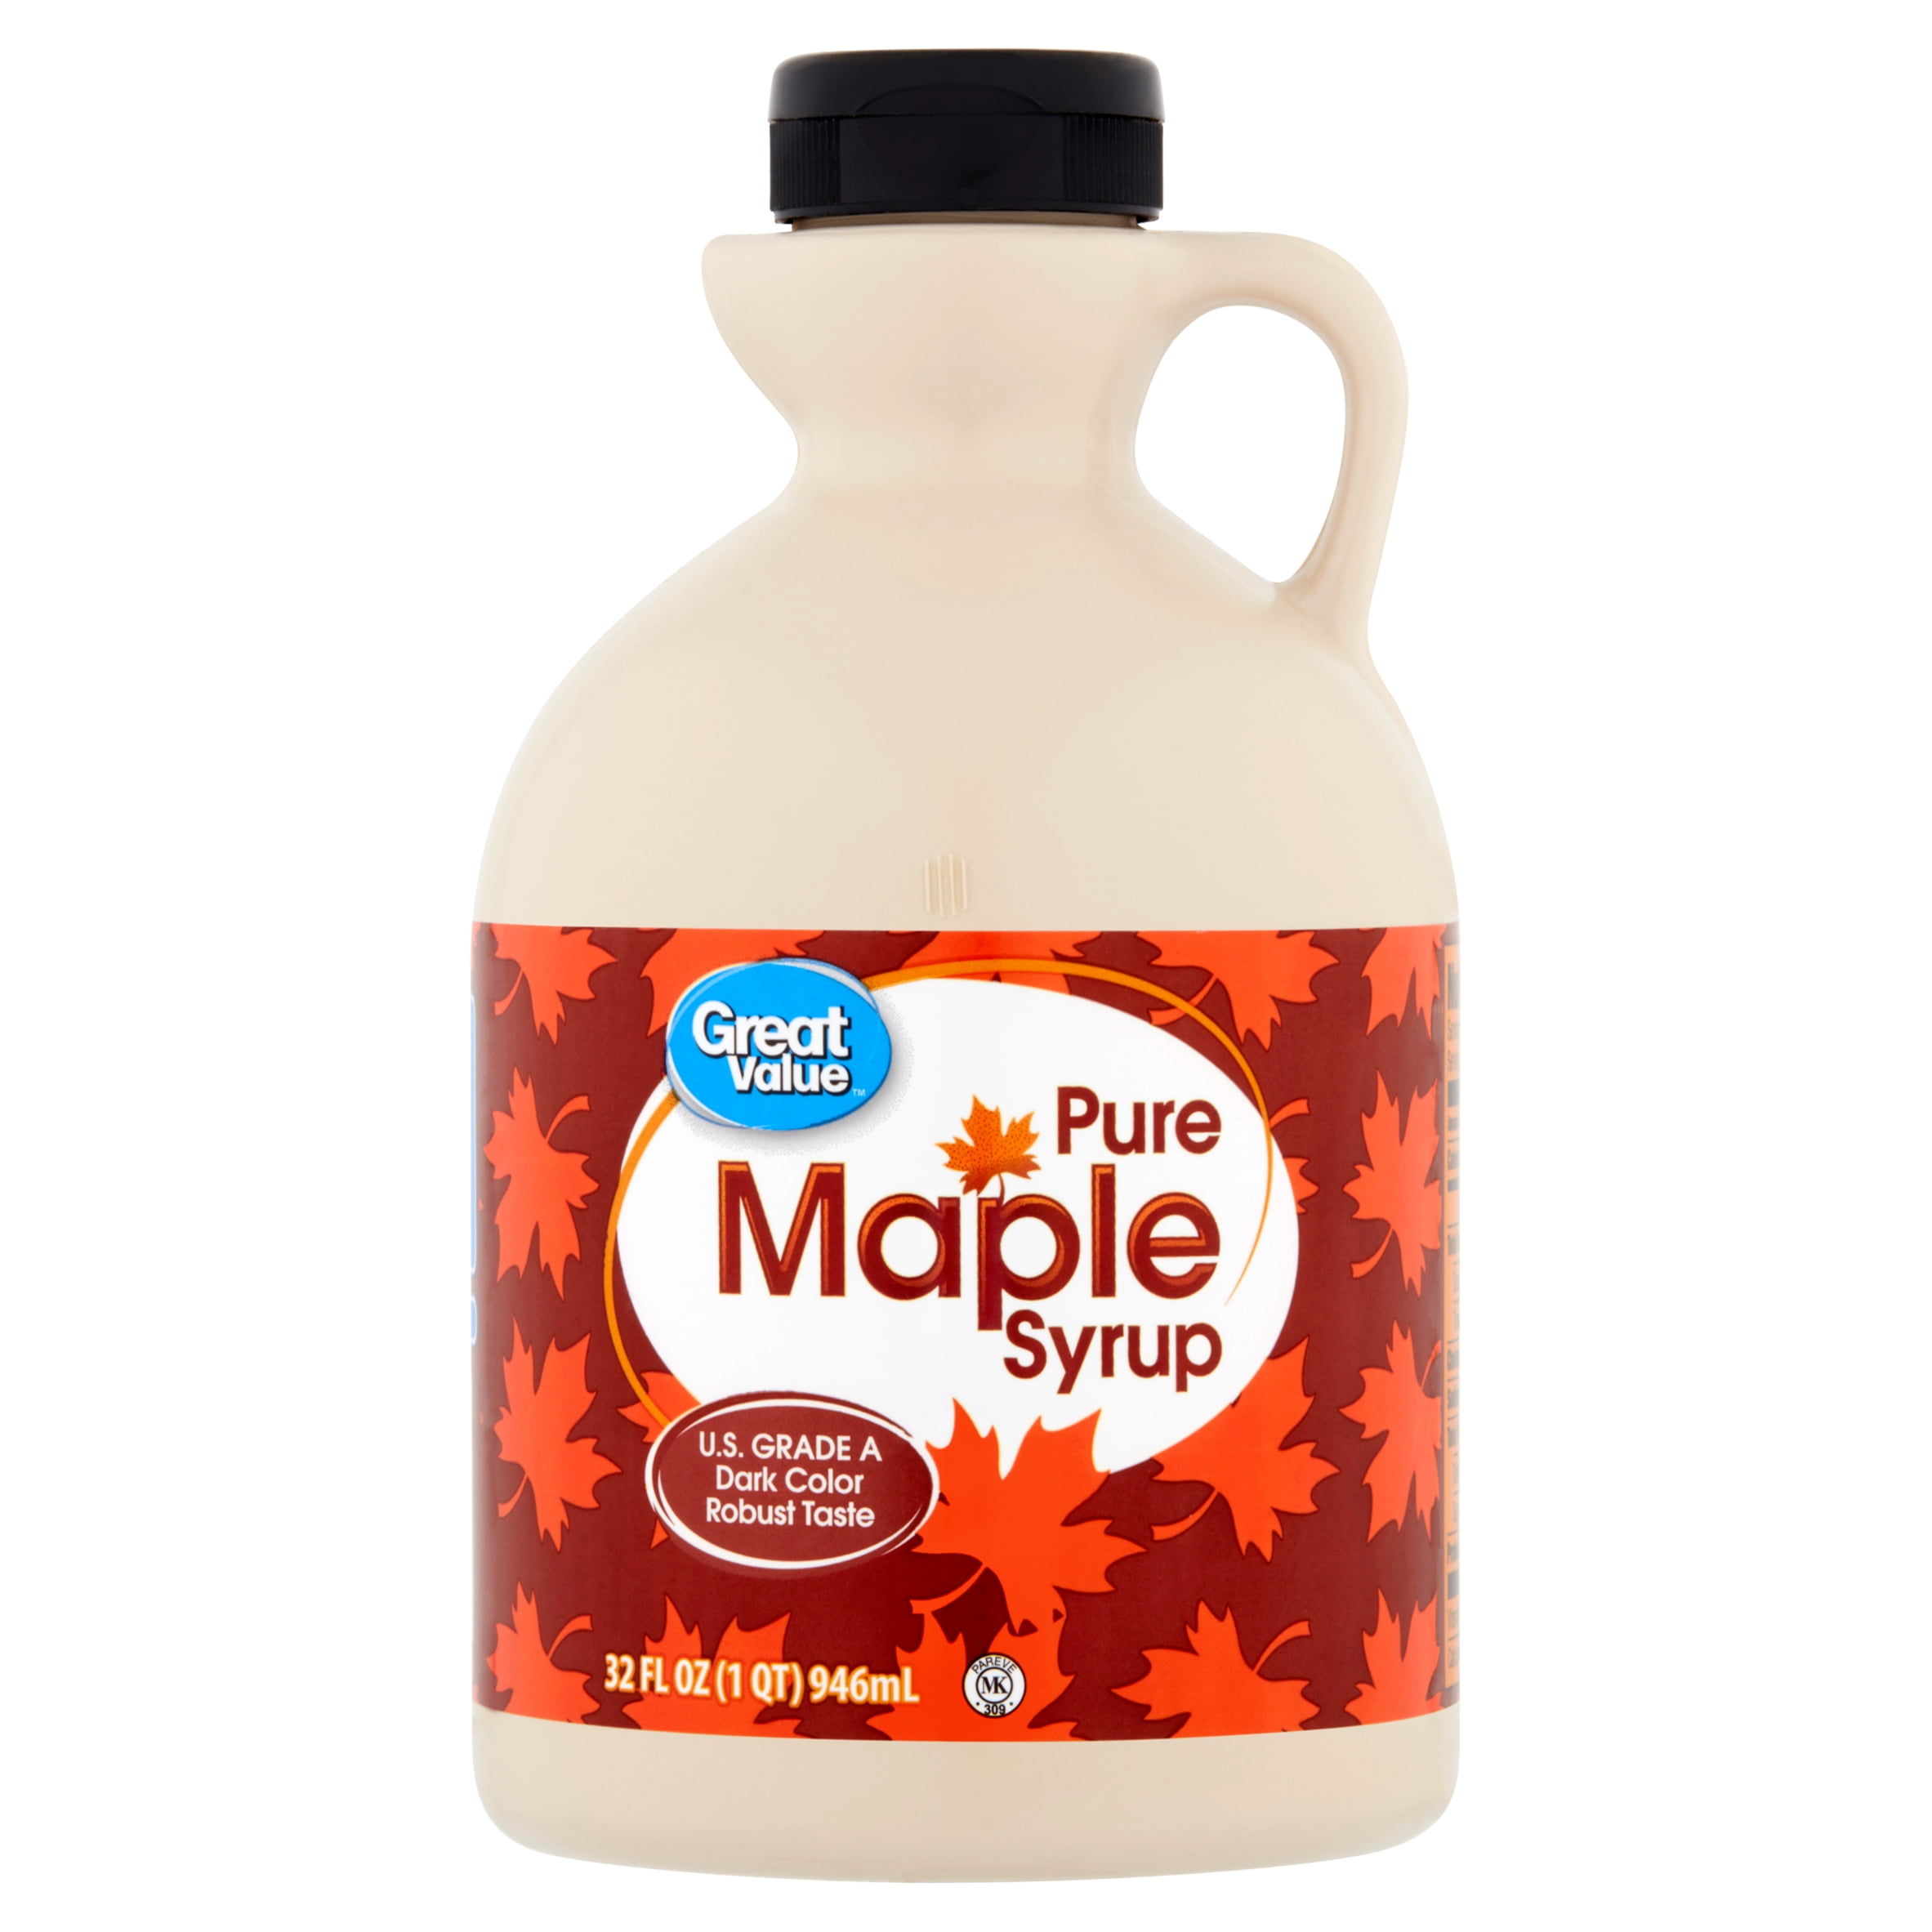 Great Value Pure Maple Syrup, 32 fl oz